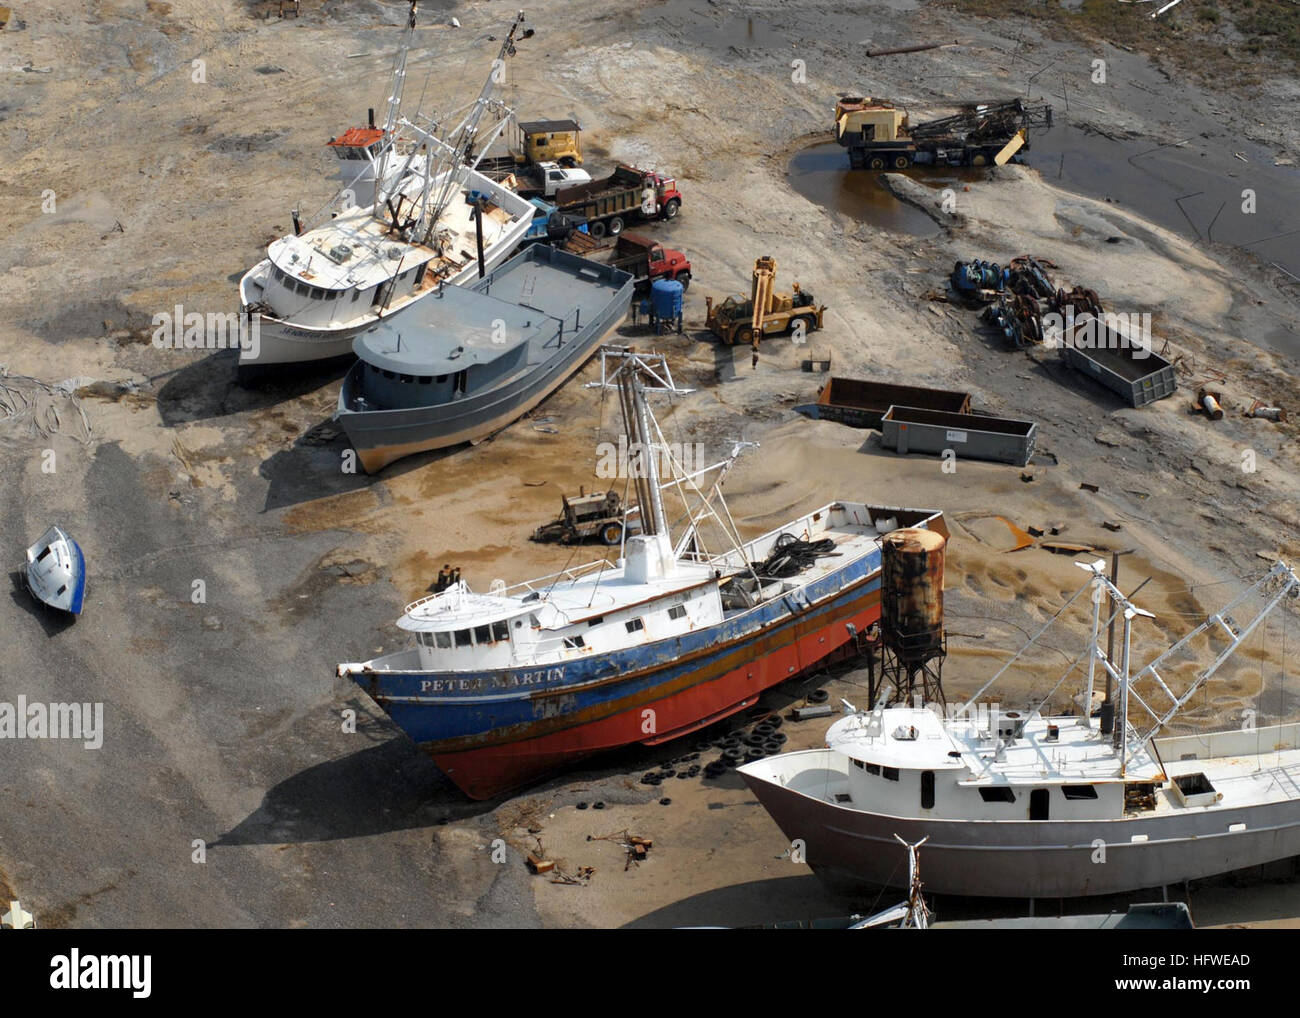 080919-N-6575H-663 GALVESTON, Texas (Sept. 19, 2008) Damaged boats are seen in this aerial photograph at a boatyard on the Bolivar Peninsula in Galveston, Texas. Hurricane Ike struck the Texas Gulf Coast as a strong category 2 storm Sept. 13, causing wide-spread damage to the region. (U.S. Navy photo by Chief Mass Communication Specialist Chris Hoffpauir/Released) US Navy 080919-N-6575H-663 Damaged boats are seen in this aerial photograph at a boatyard on the Bolivar Peninsula in Galveston, Texas. Hurricane Ike struck the Texas Gulf Coast Stock Photo